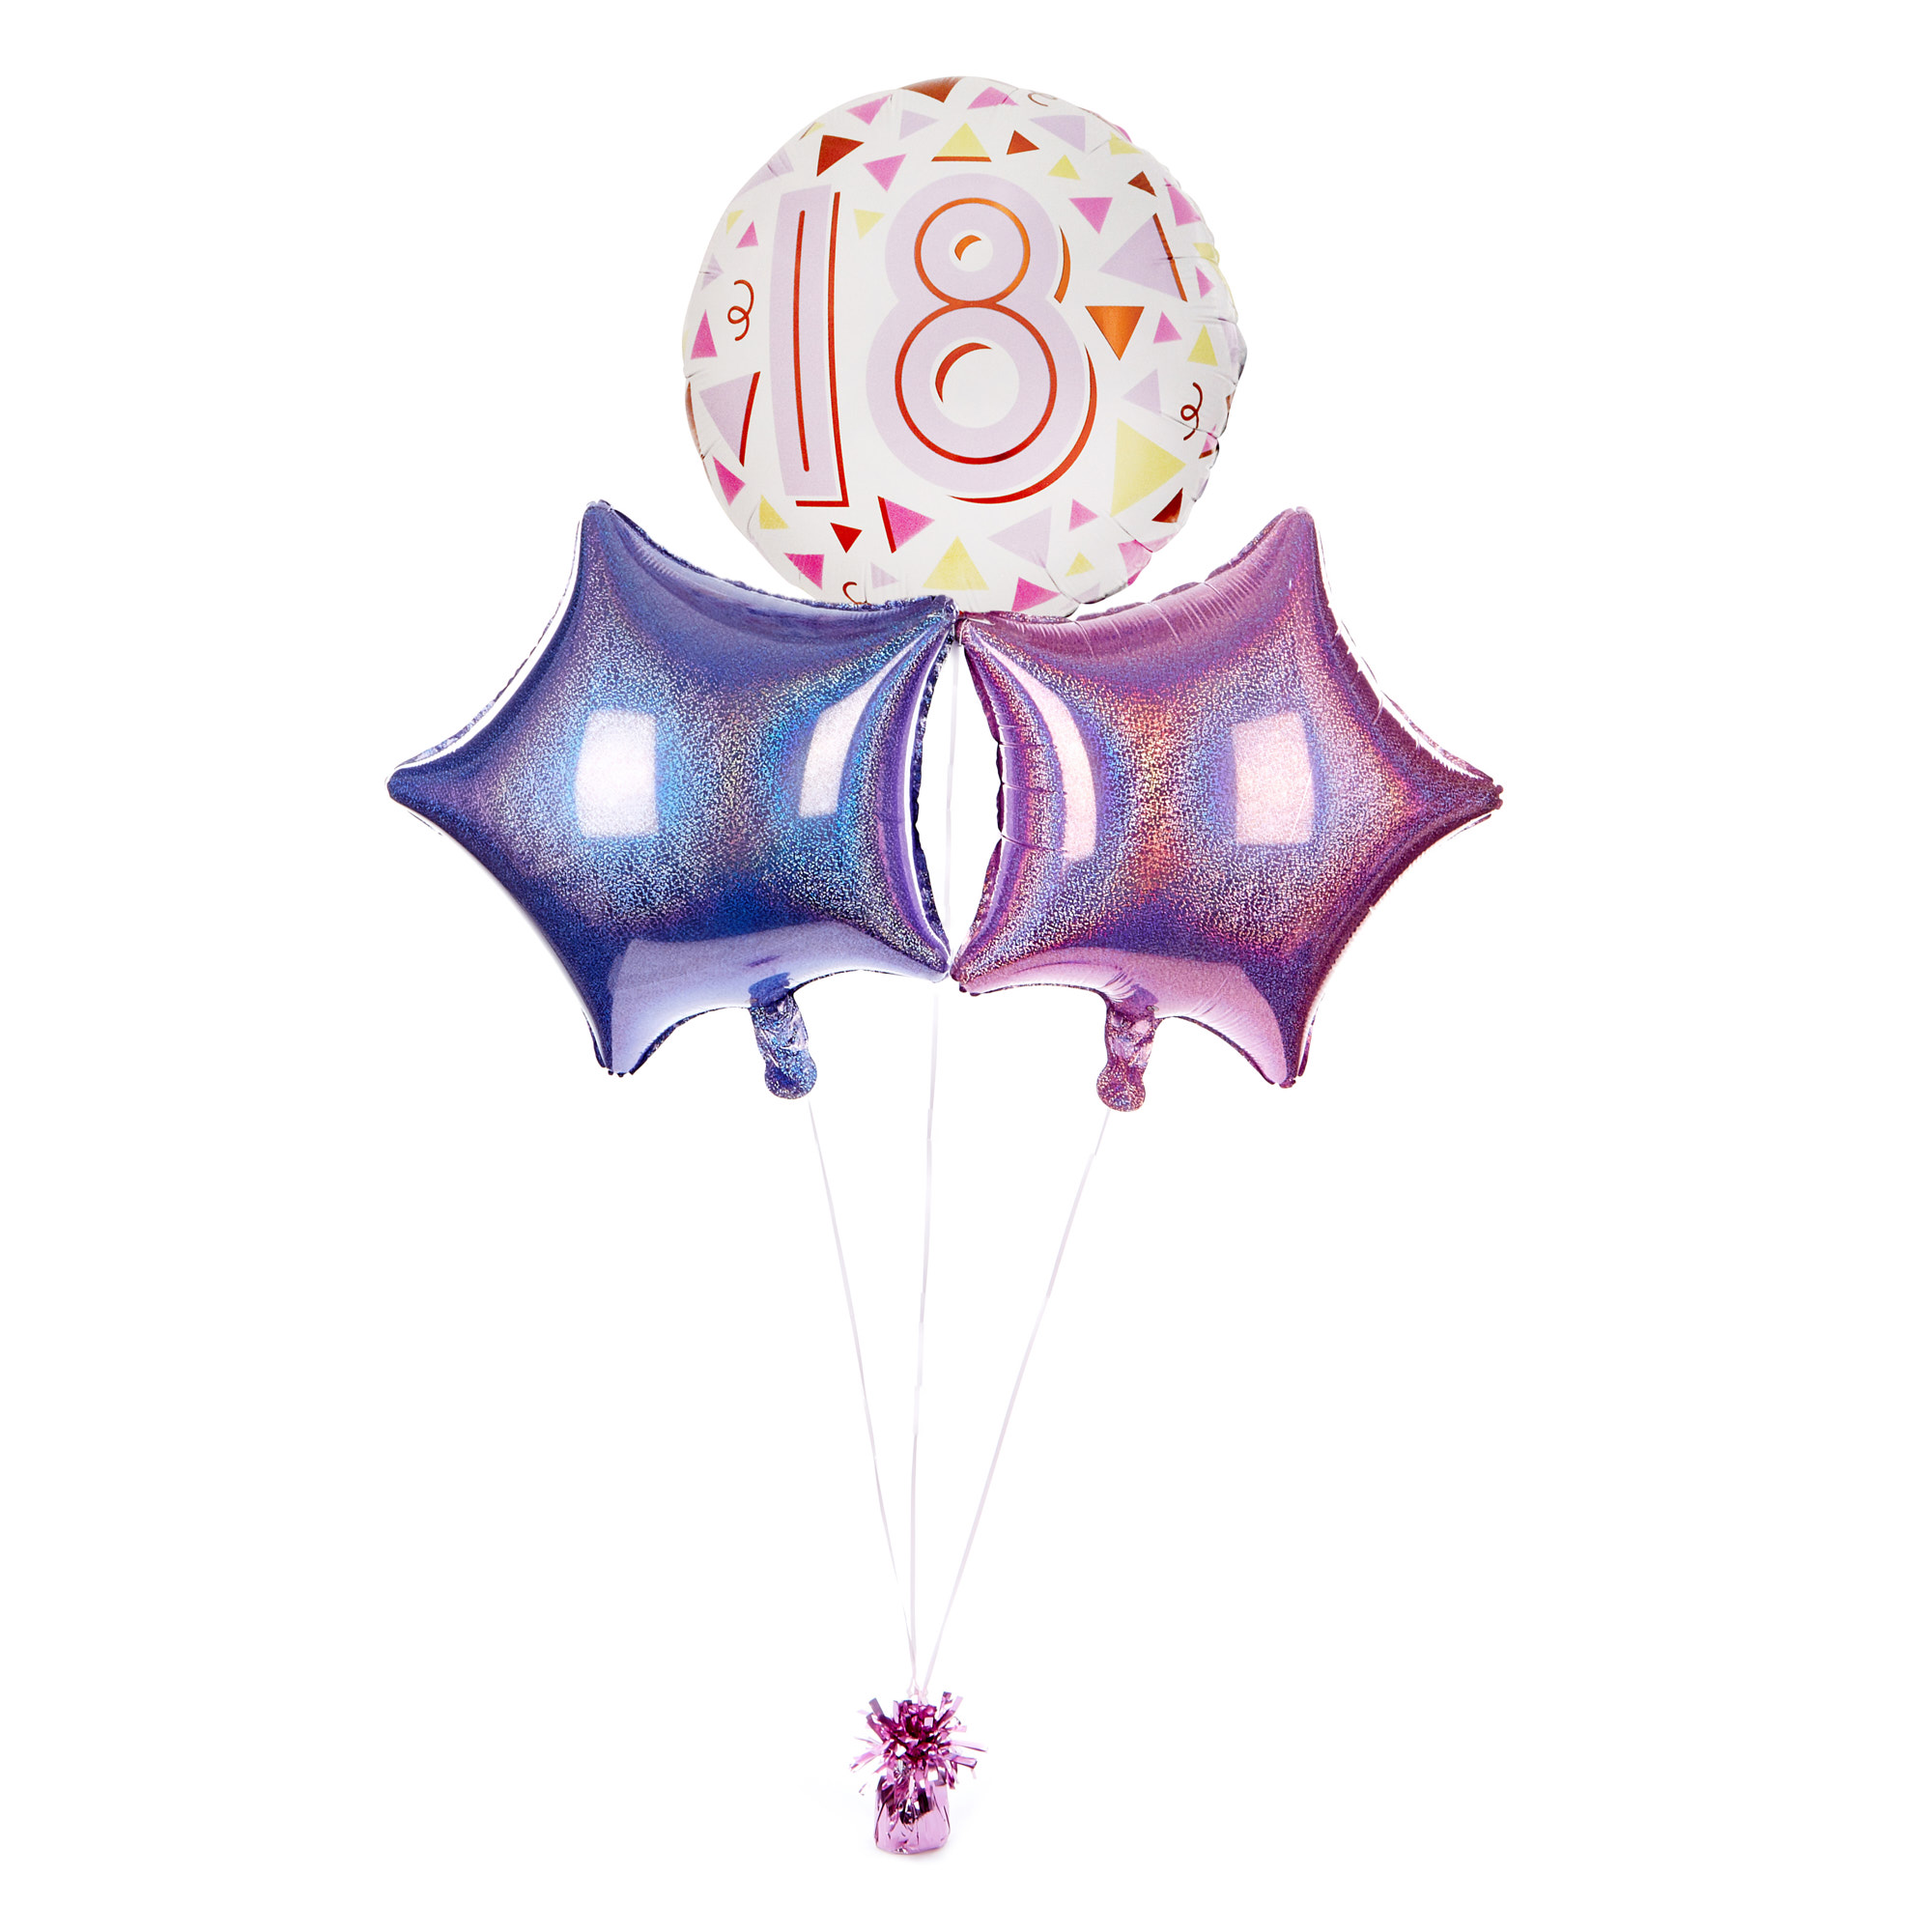 Pastel Triangles 18th Birthday Balloon Bouquet - DELIVERED INFLATED!